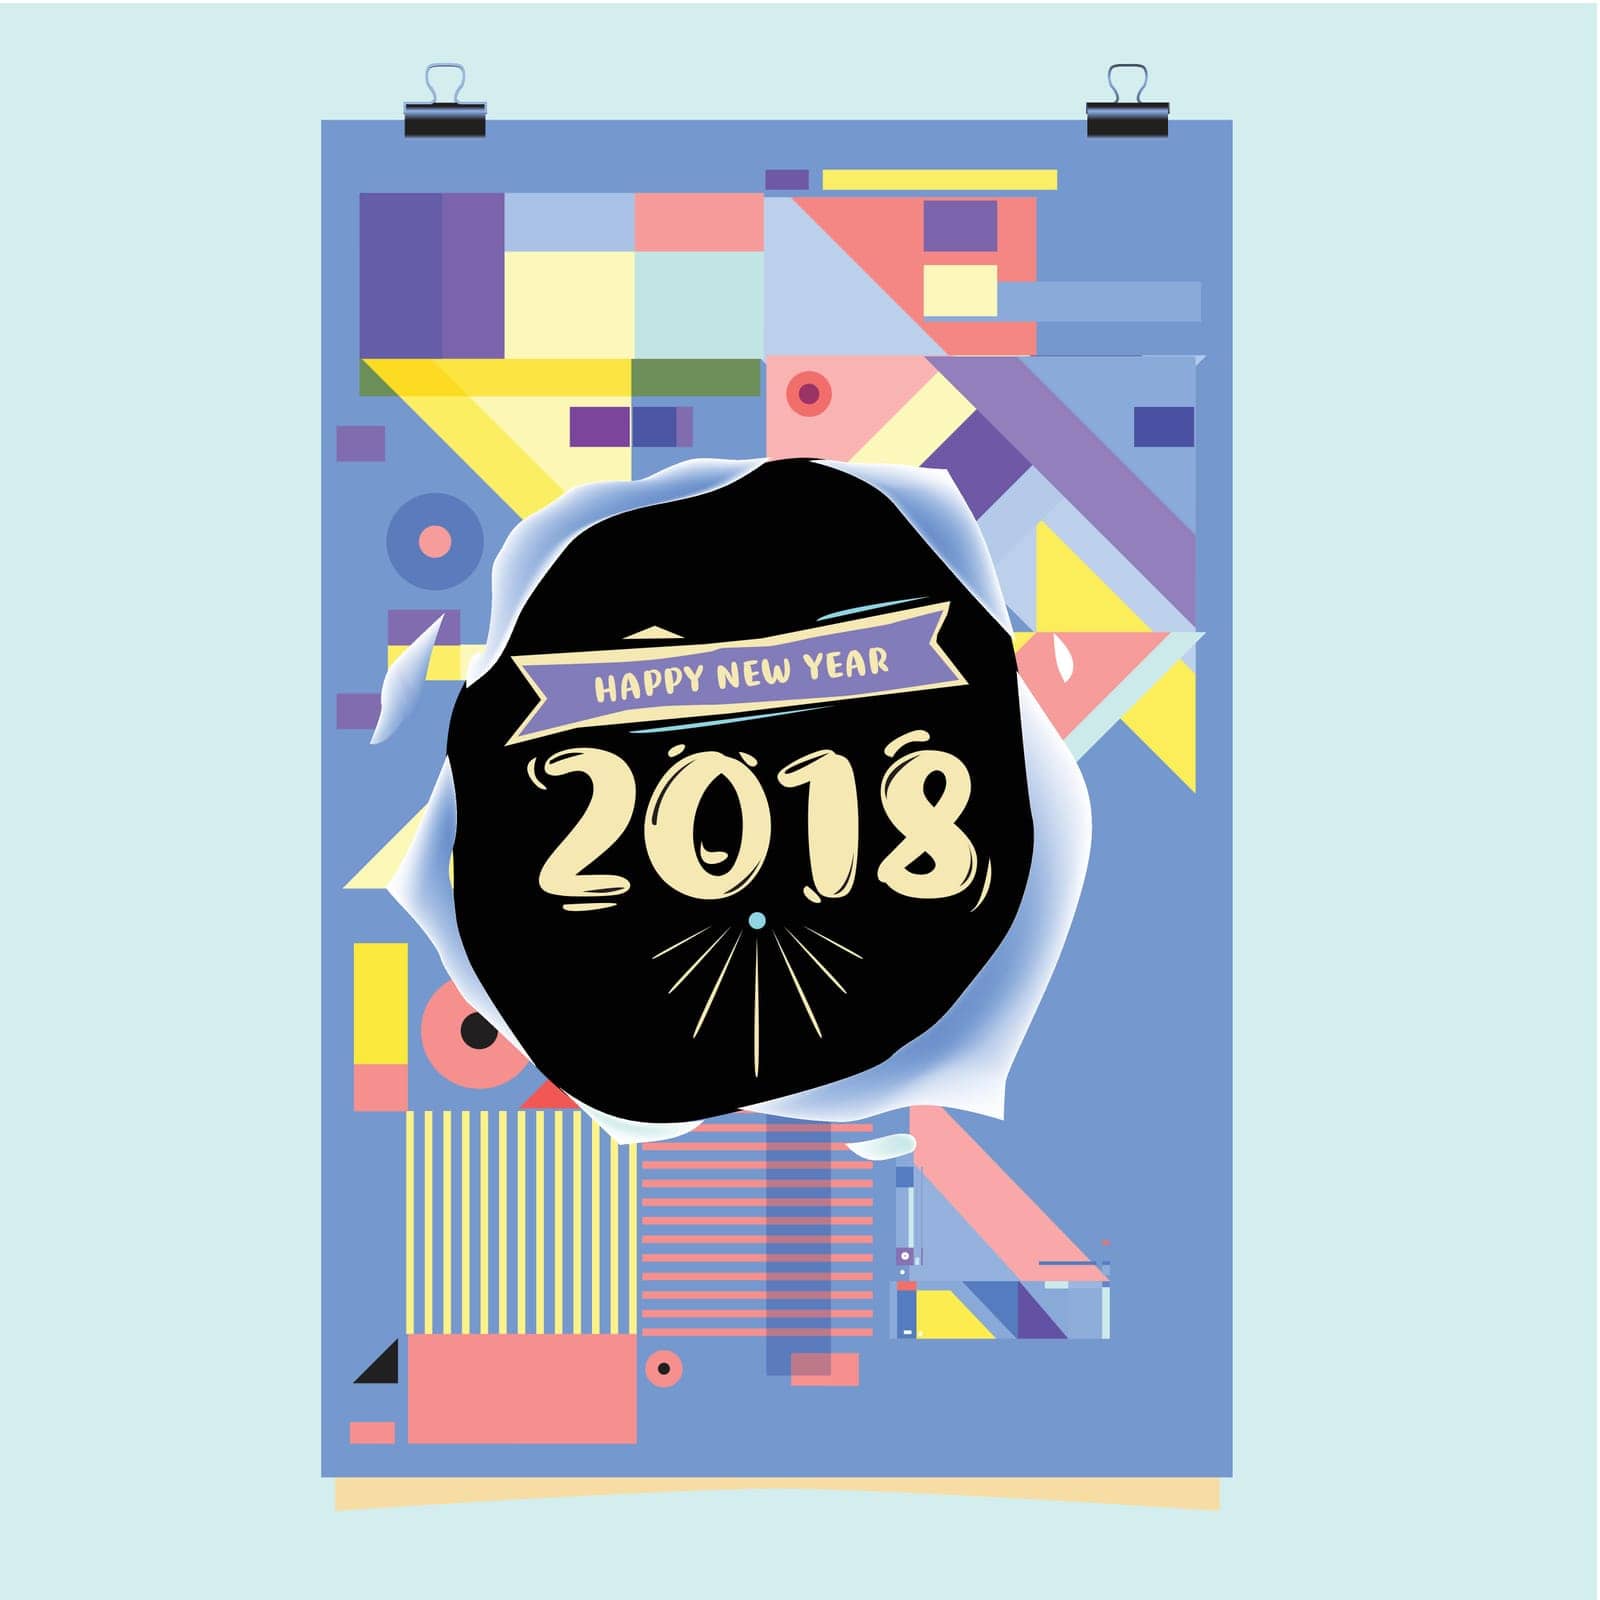 date,symbol,typography,year,happy,greeting,type,cover,annual,day,element,new,celebrate,invitation,cheerful,decorative,christmas,square,celebration,background,geometric,style,poster,party,card,colorful,template,winter,holiday,ornament,happiness,eve,design,vector,event,xmas,calendar,memphis,set,display,festive,retro,banner,2021,abstract,layout,multicolored,2018,illustration by ogqcorp